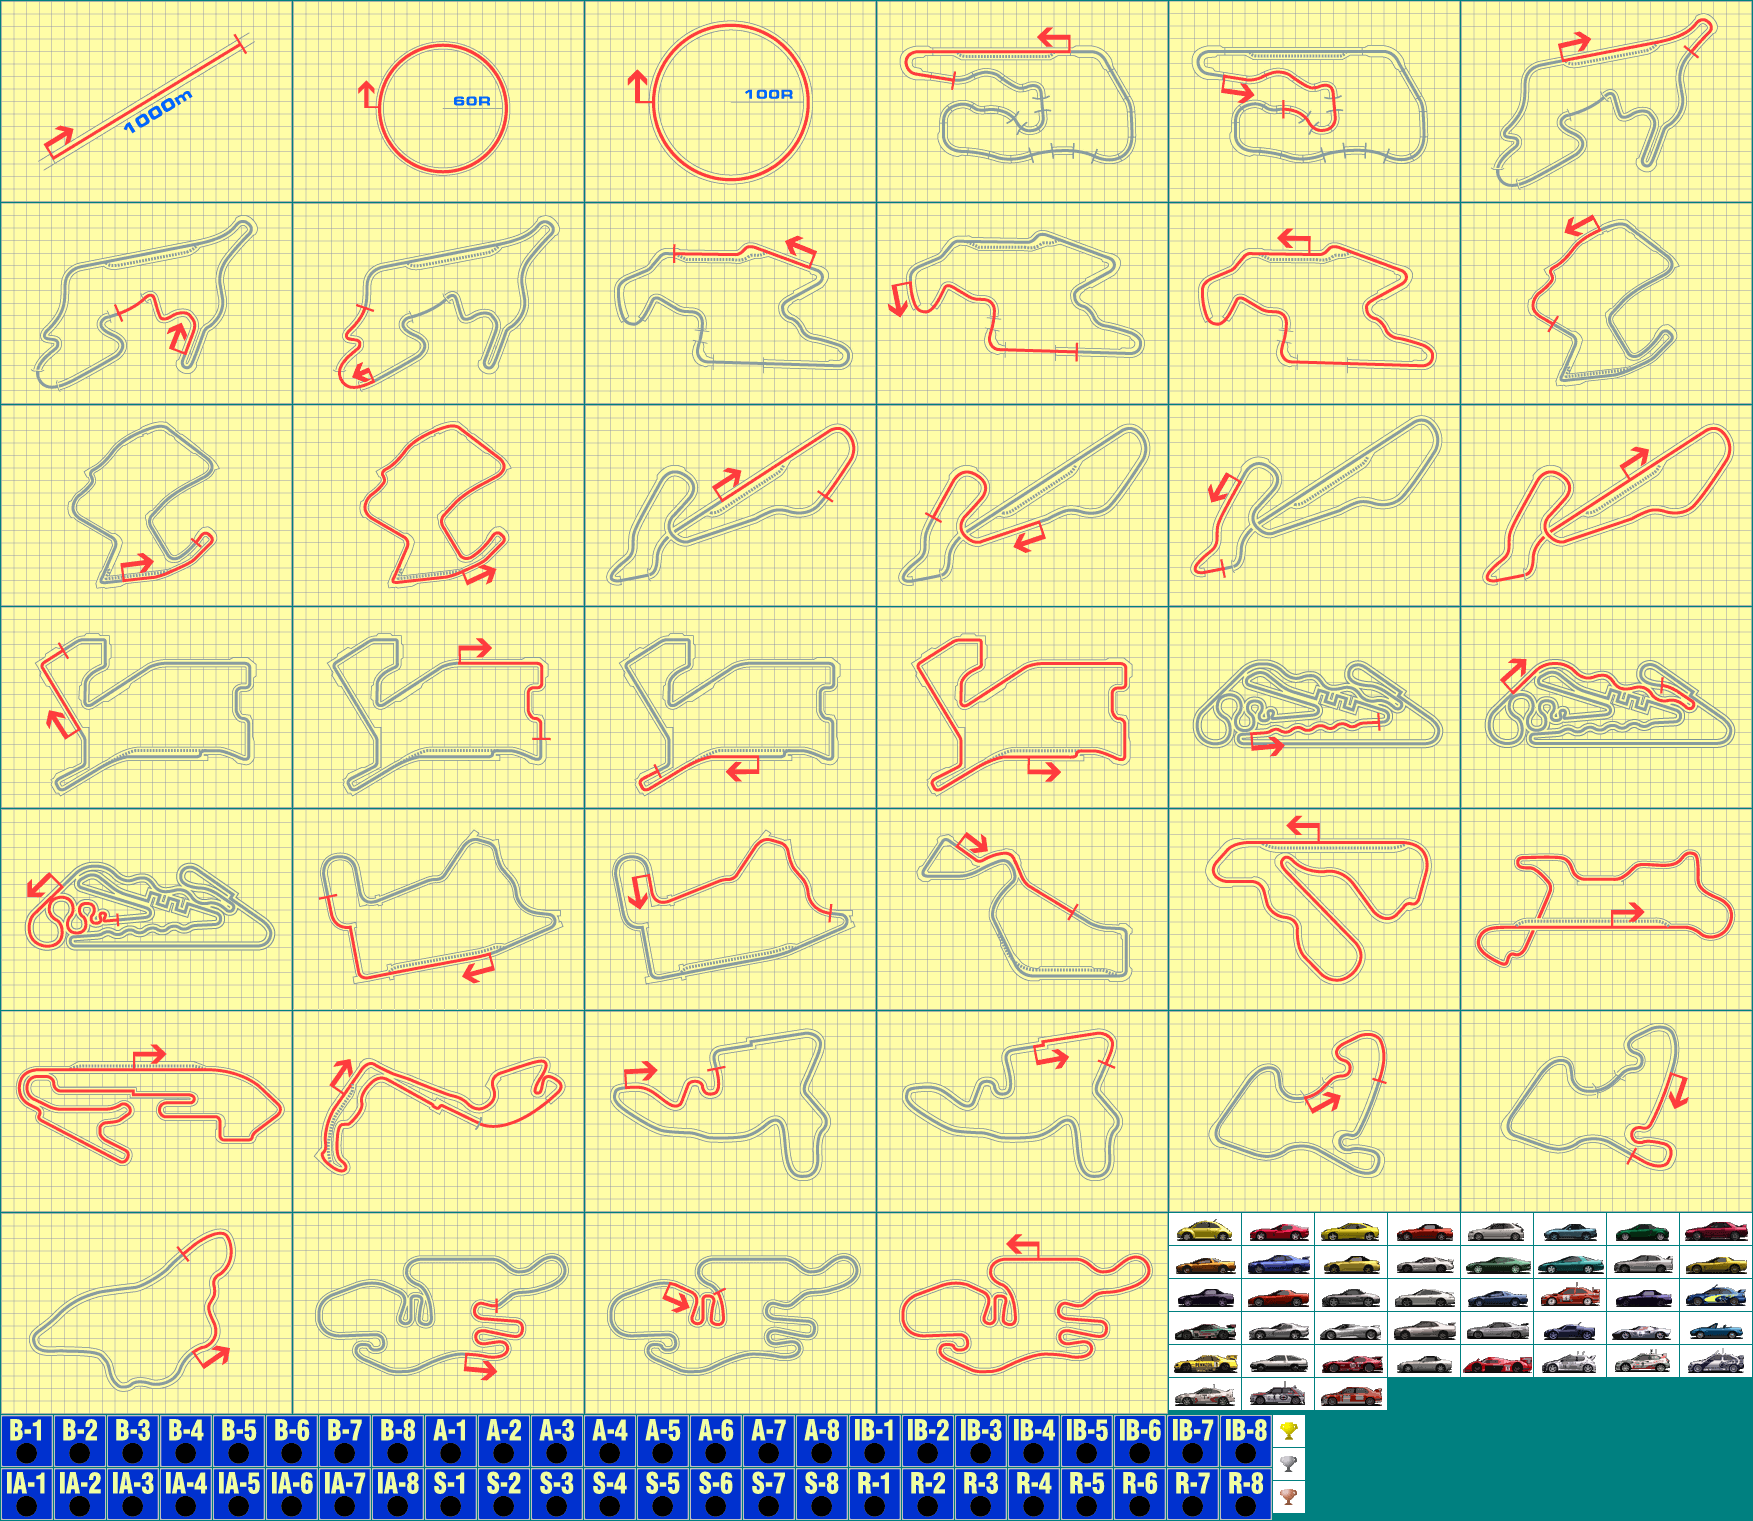 Gran Turismo 3: A-Spec - Driving Test Icons